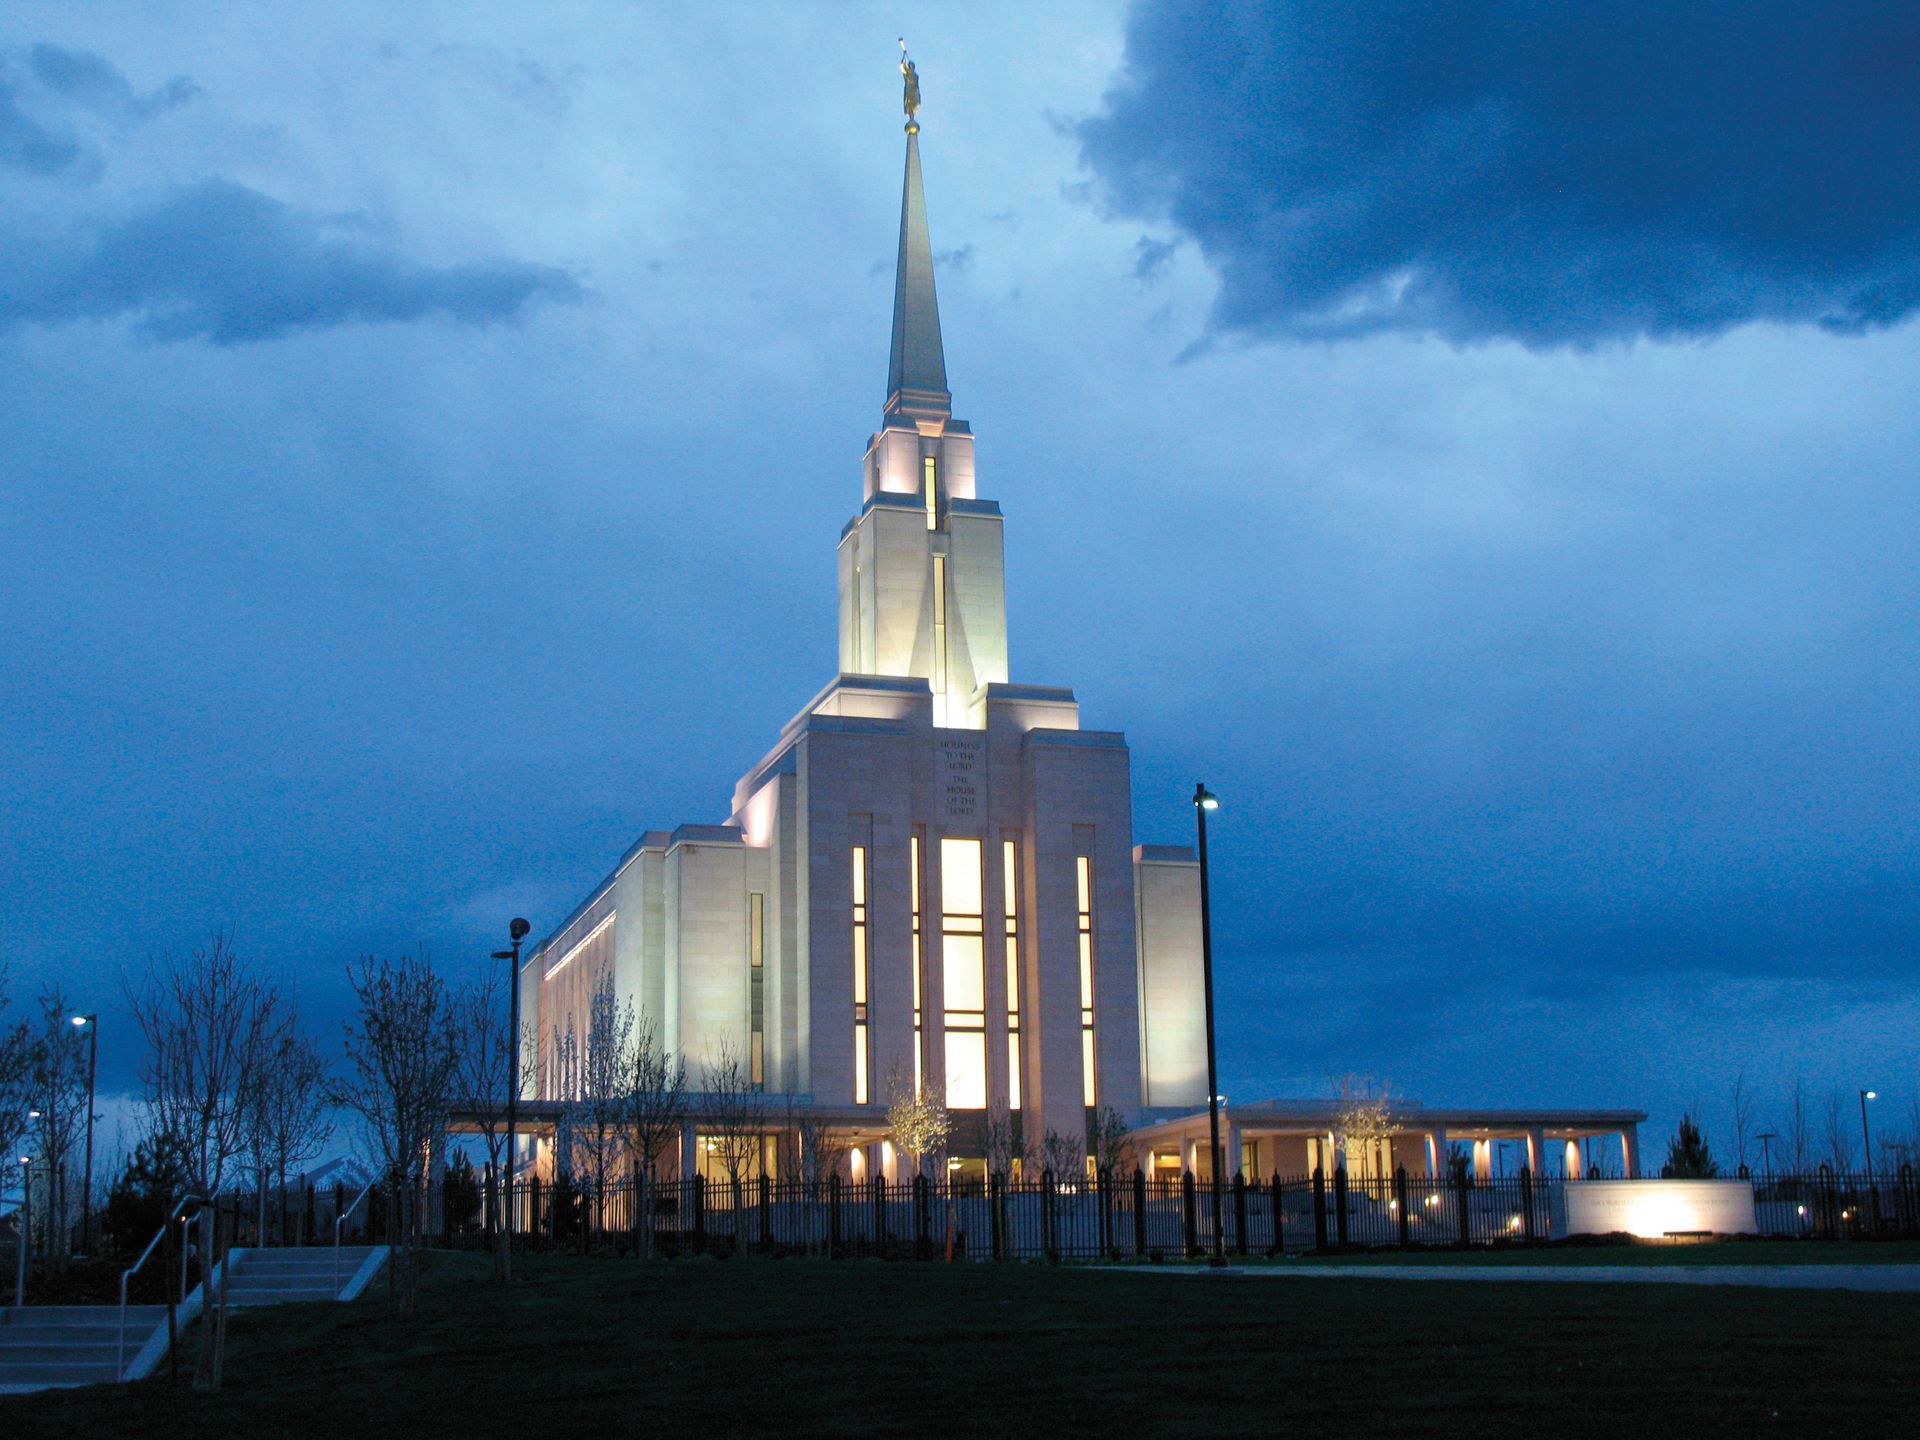 The Oquirrh Mountain Utah Temple in the evening, including the entrance and scenery.